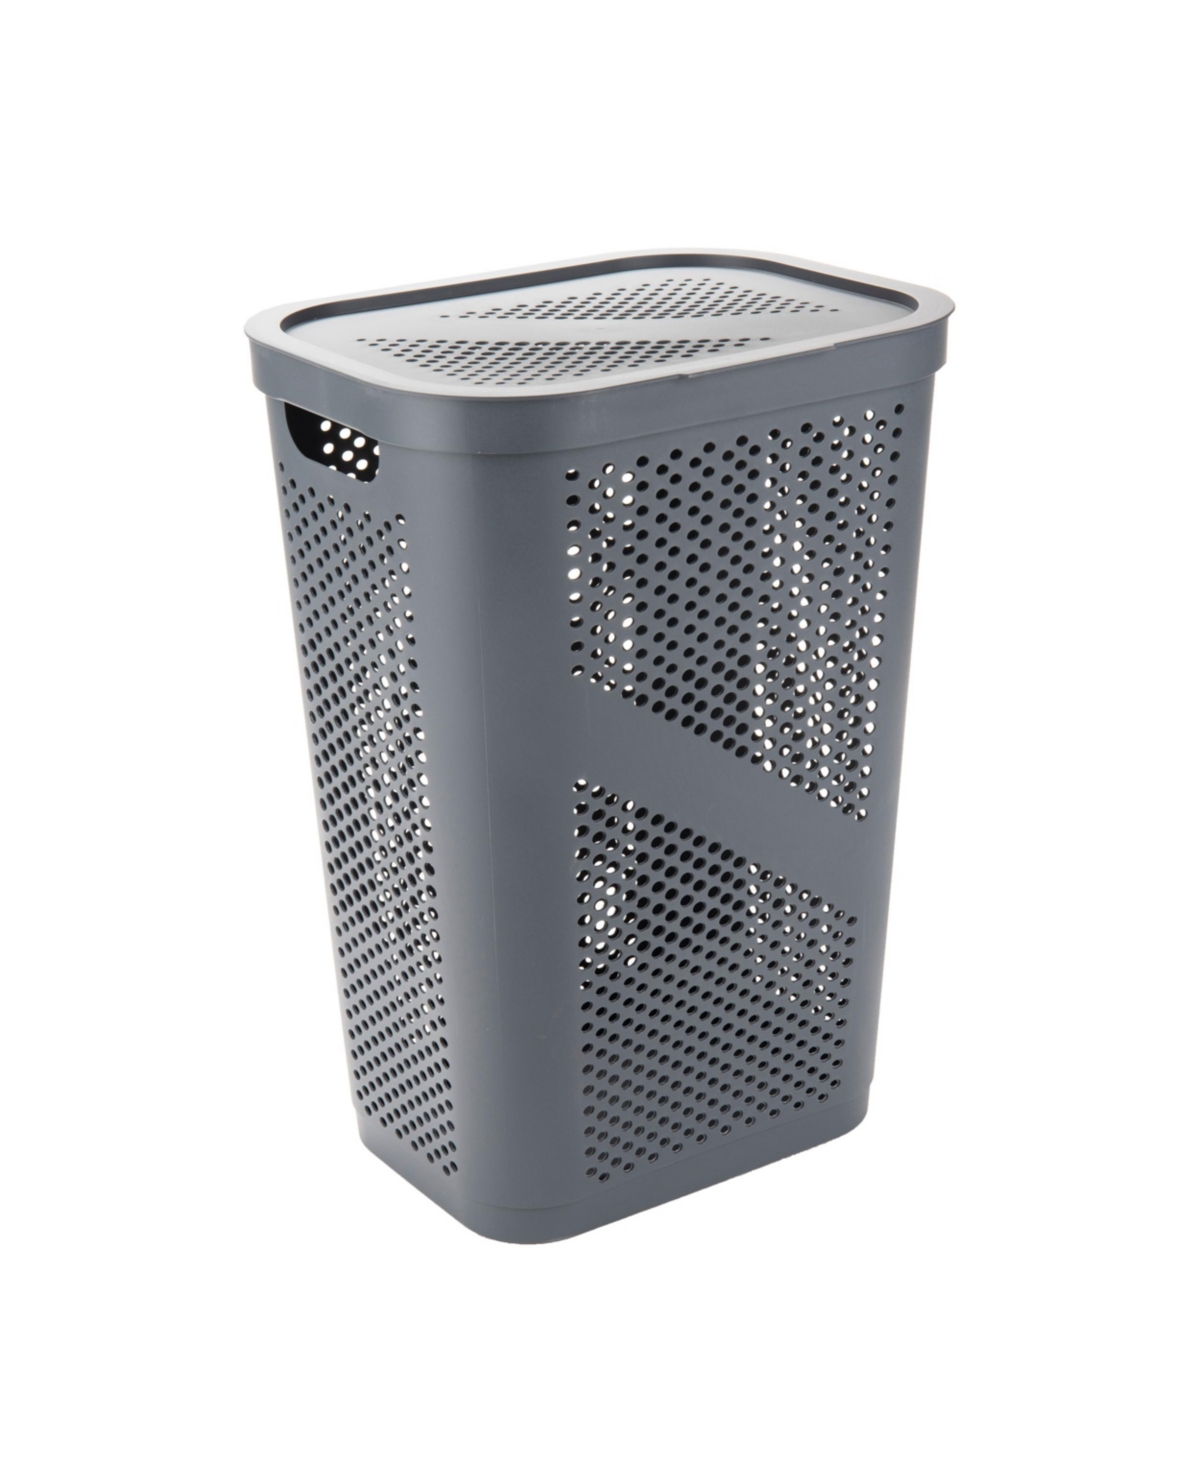 Basket Collection, Slim Laundry Hamper, 60 Liter 15Kg/33Lbs Capacity, Attached Hinged Lid - Gray